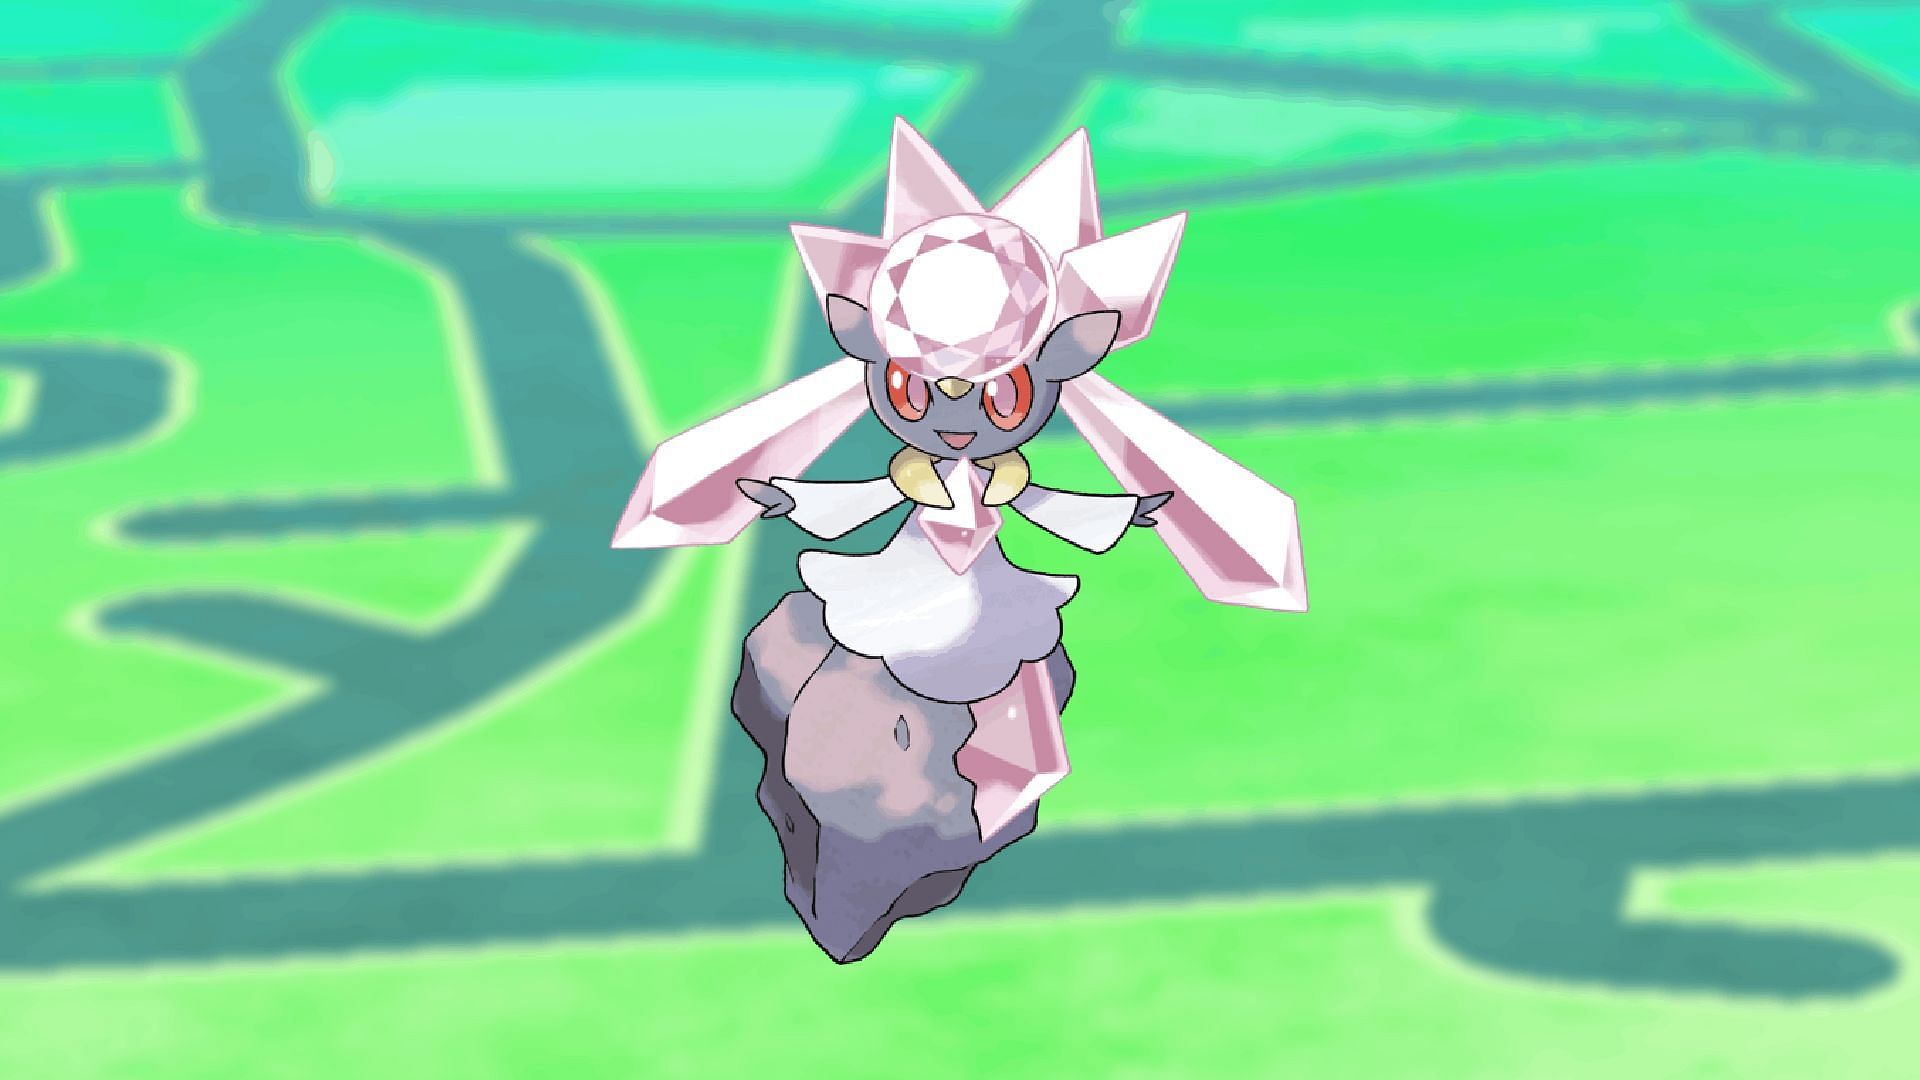 Diancie Global Special Research in Pokemon GO (Image via The Pokemon Company)